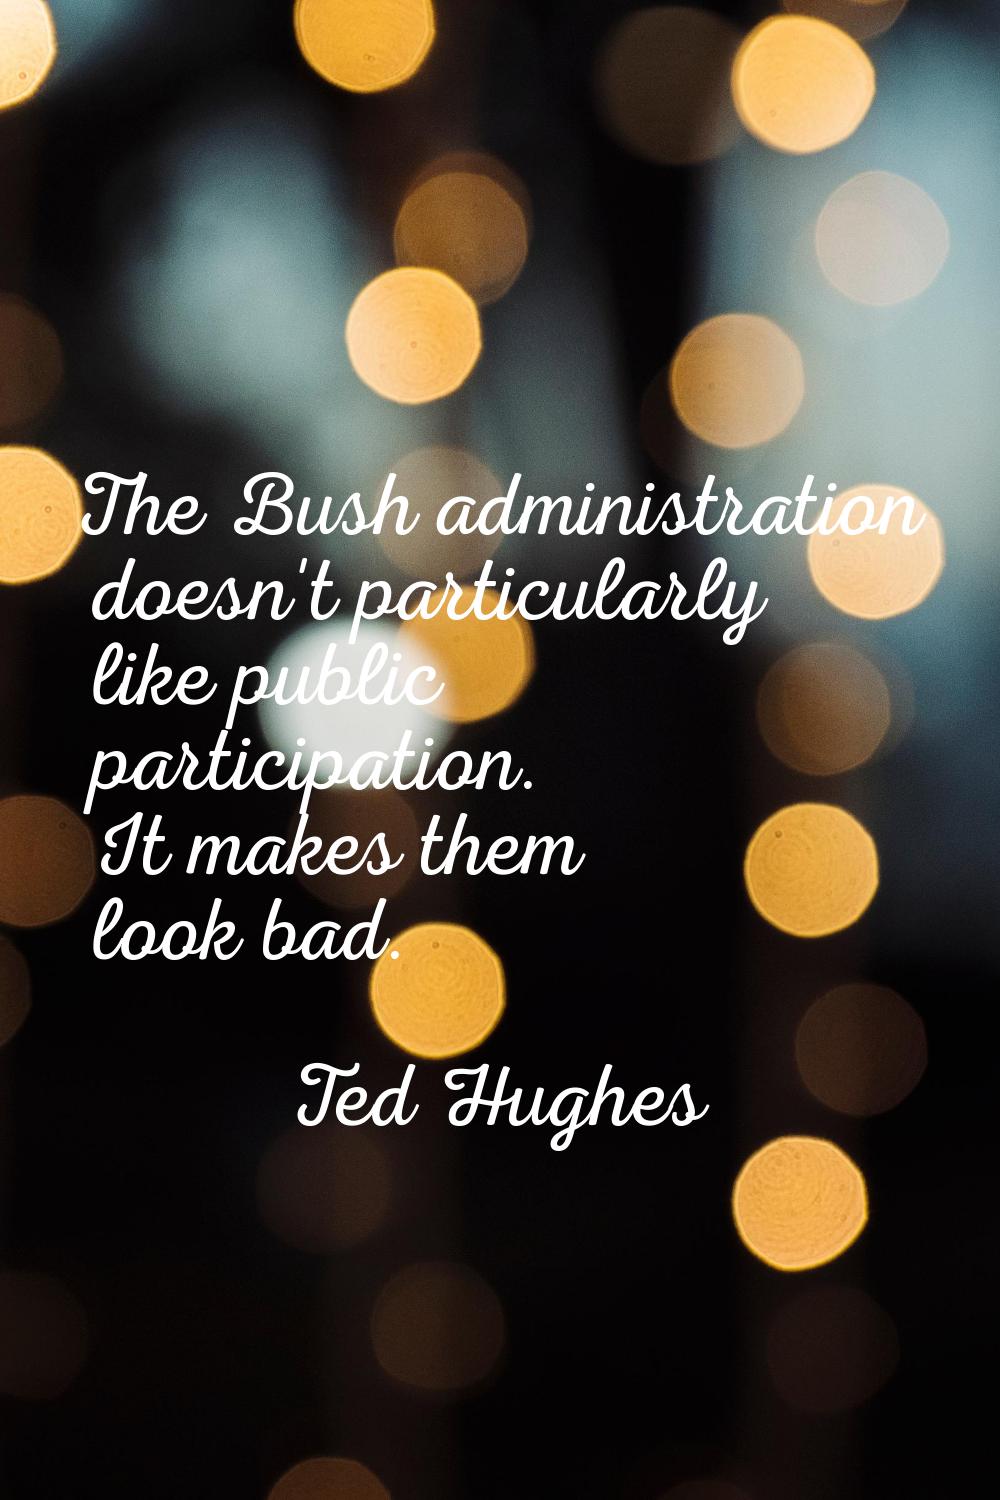 The Bush administration doesn't particularly like public participation. It makes them look bad.